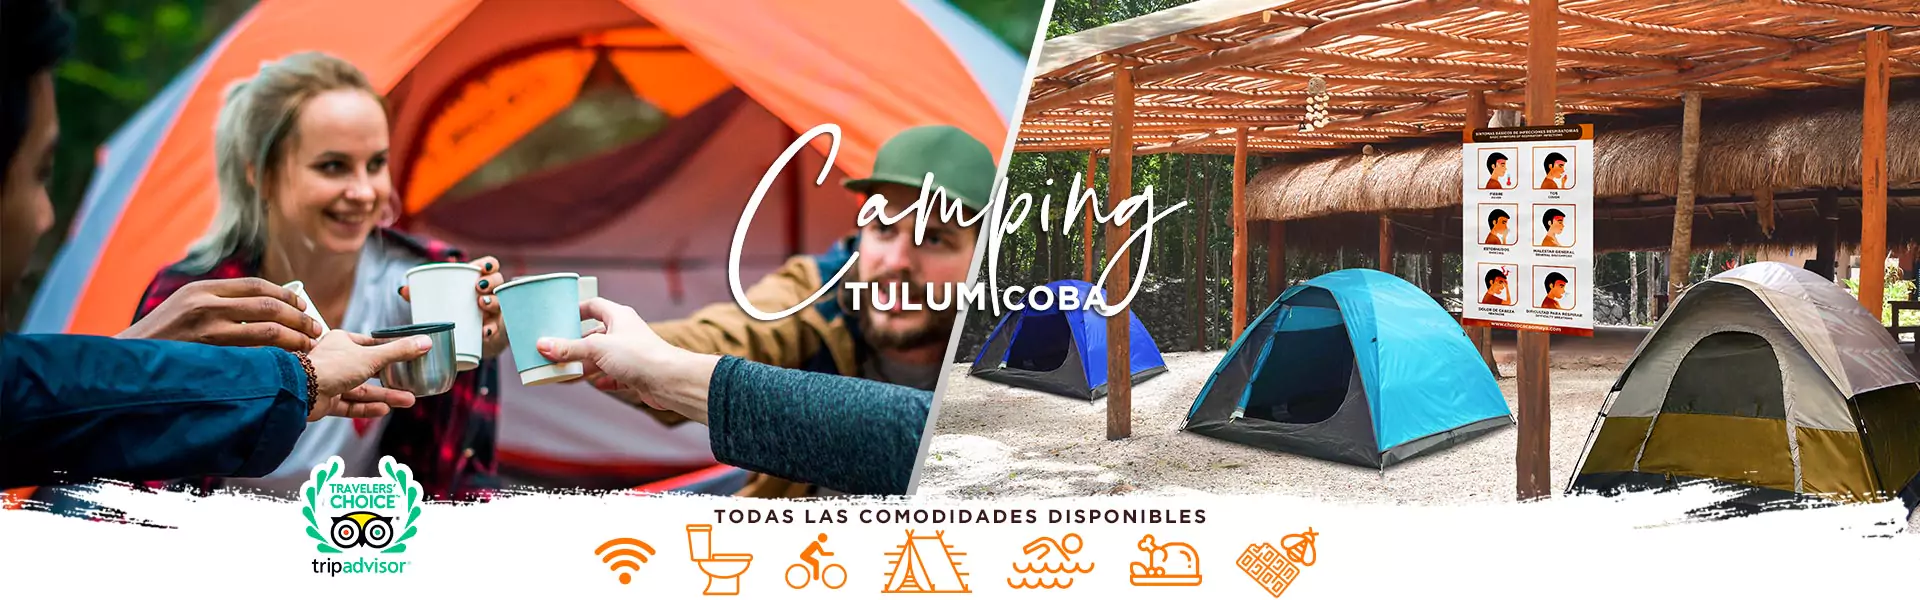 Best places to camping tulum and Coba